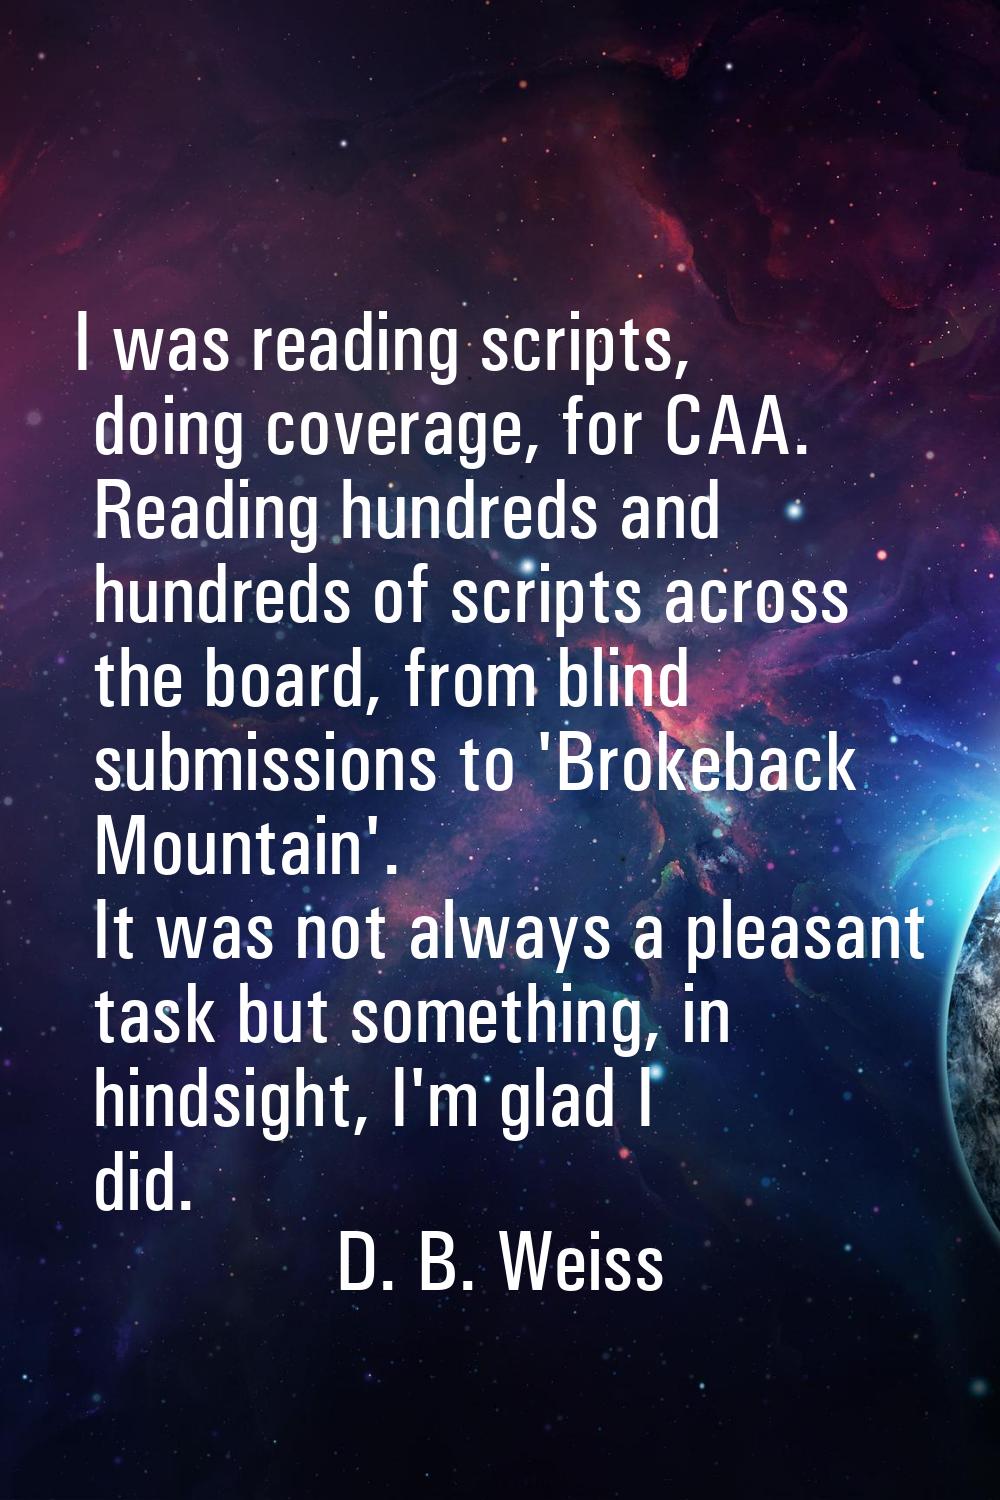 I was reading scripts, doing coverage, for CAA. Reading hundreds and hundreds of scripts across the